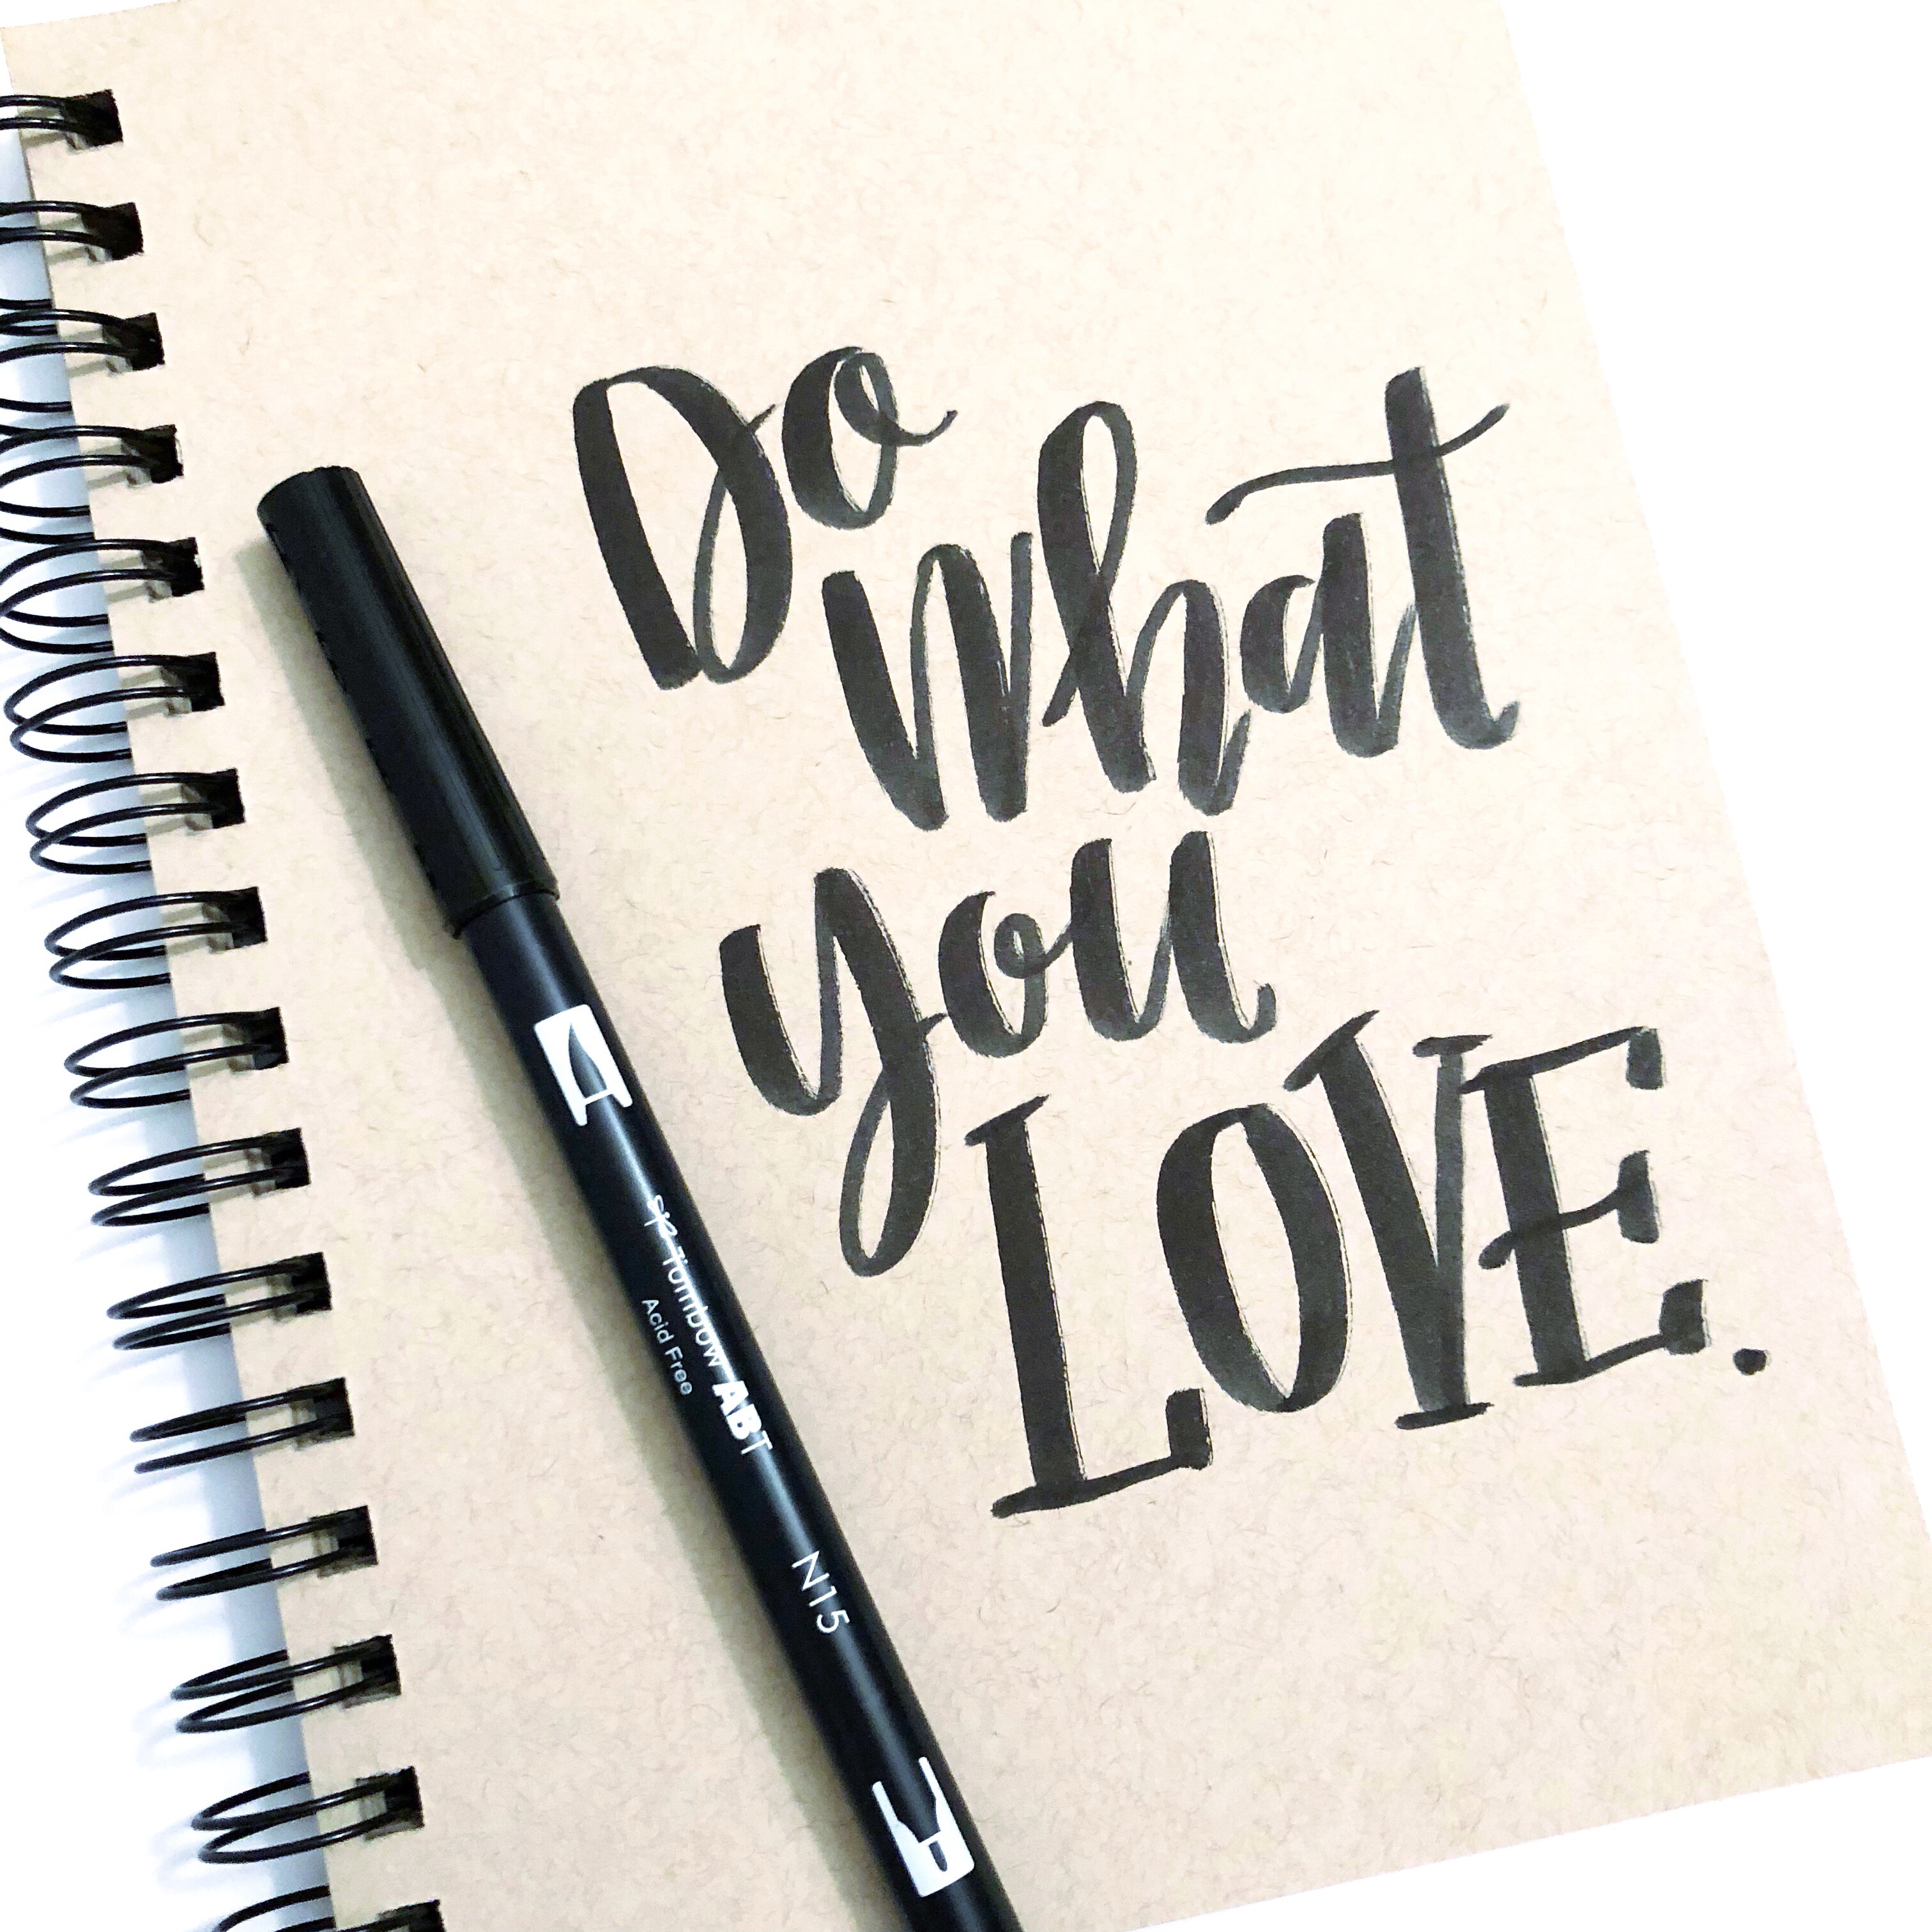 Lauren Fitzmaurice of @renmadecalligraphy and renmadecalligraphy.com gives you three fun tips for adding color to your lettering with the new Tombow 1500 Colored Pencils.